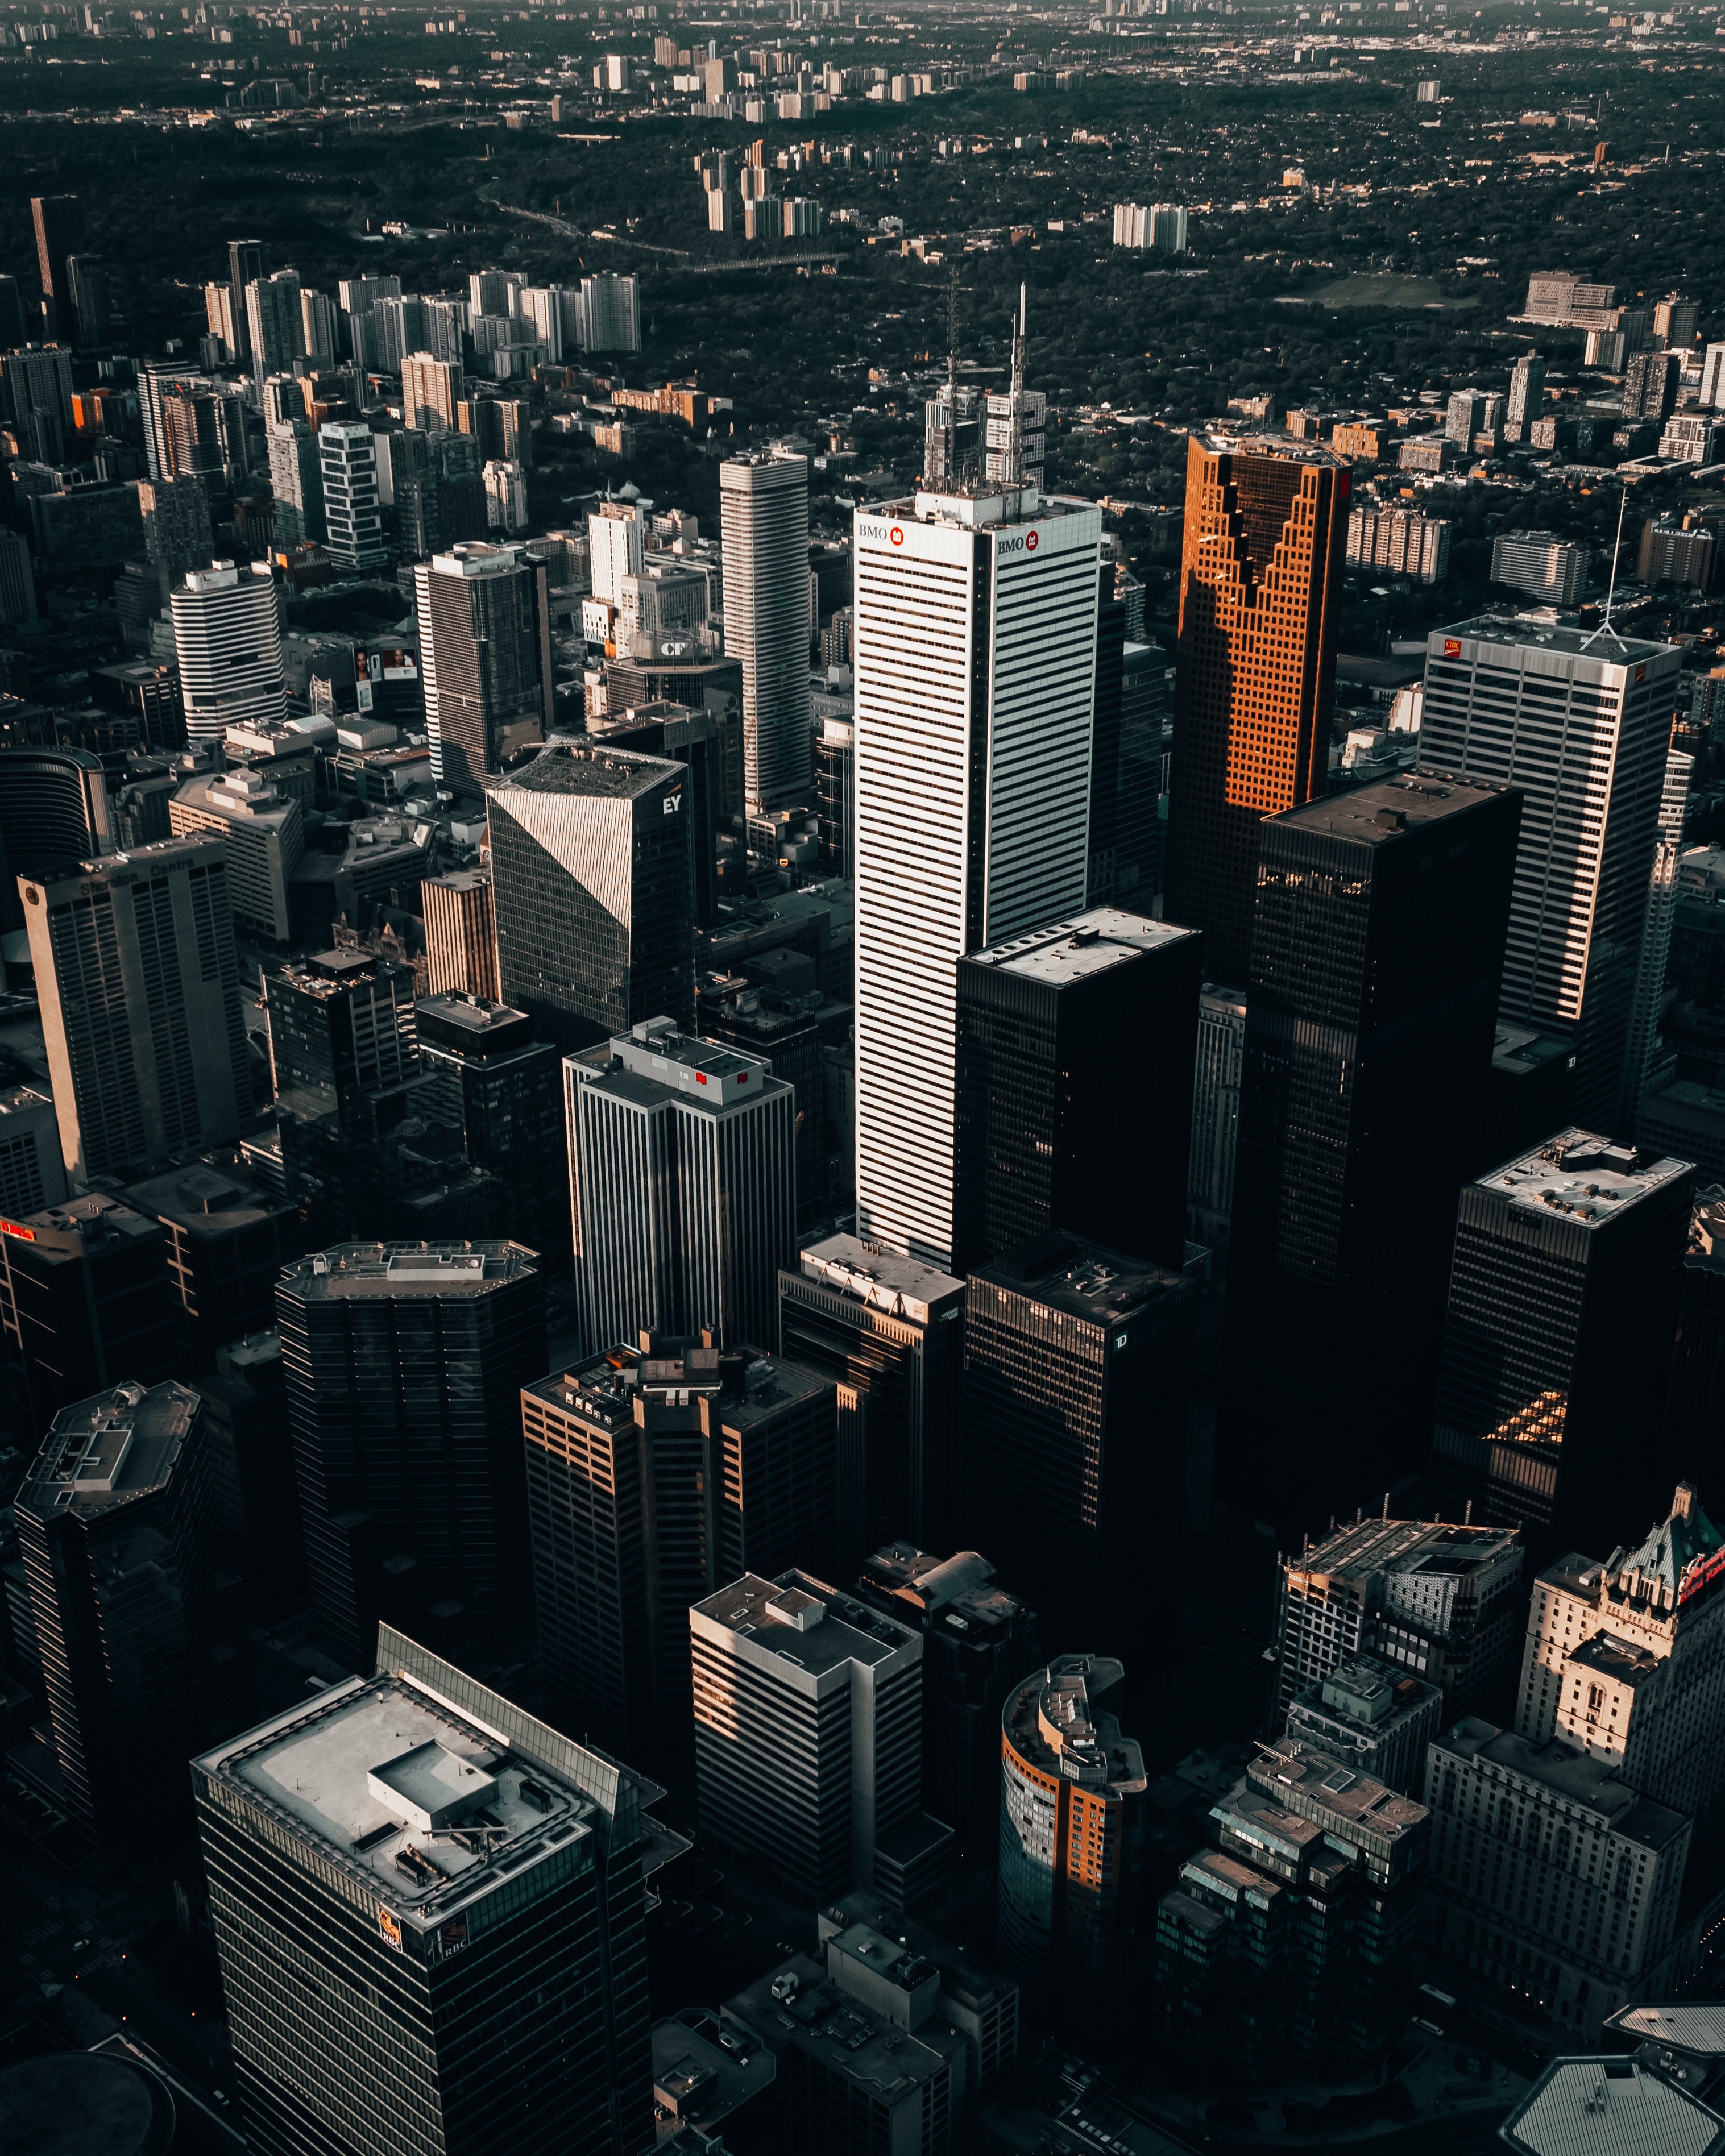 Cool Wallpapers architecture, cities, city, building, view from above, skyscrapers, megapolis, megalopolis